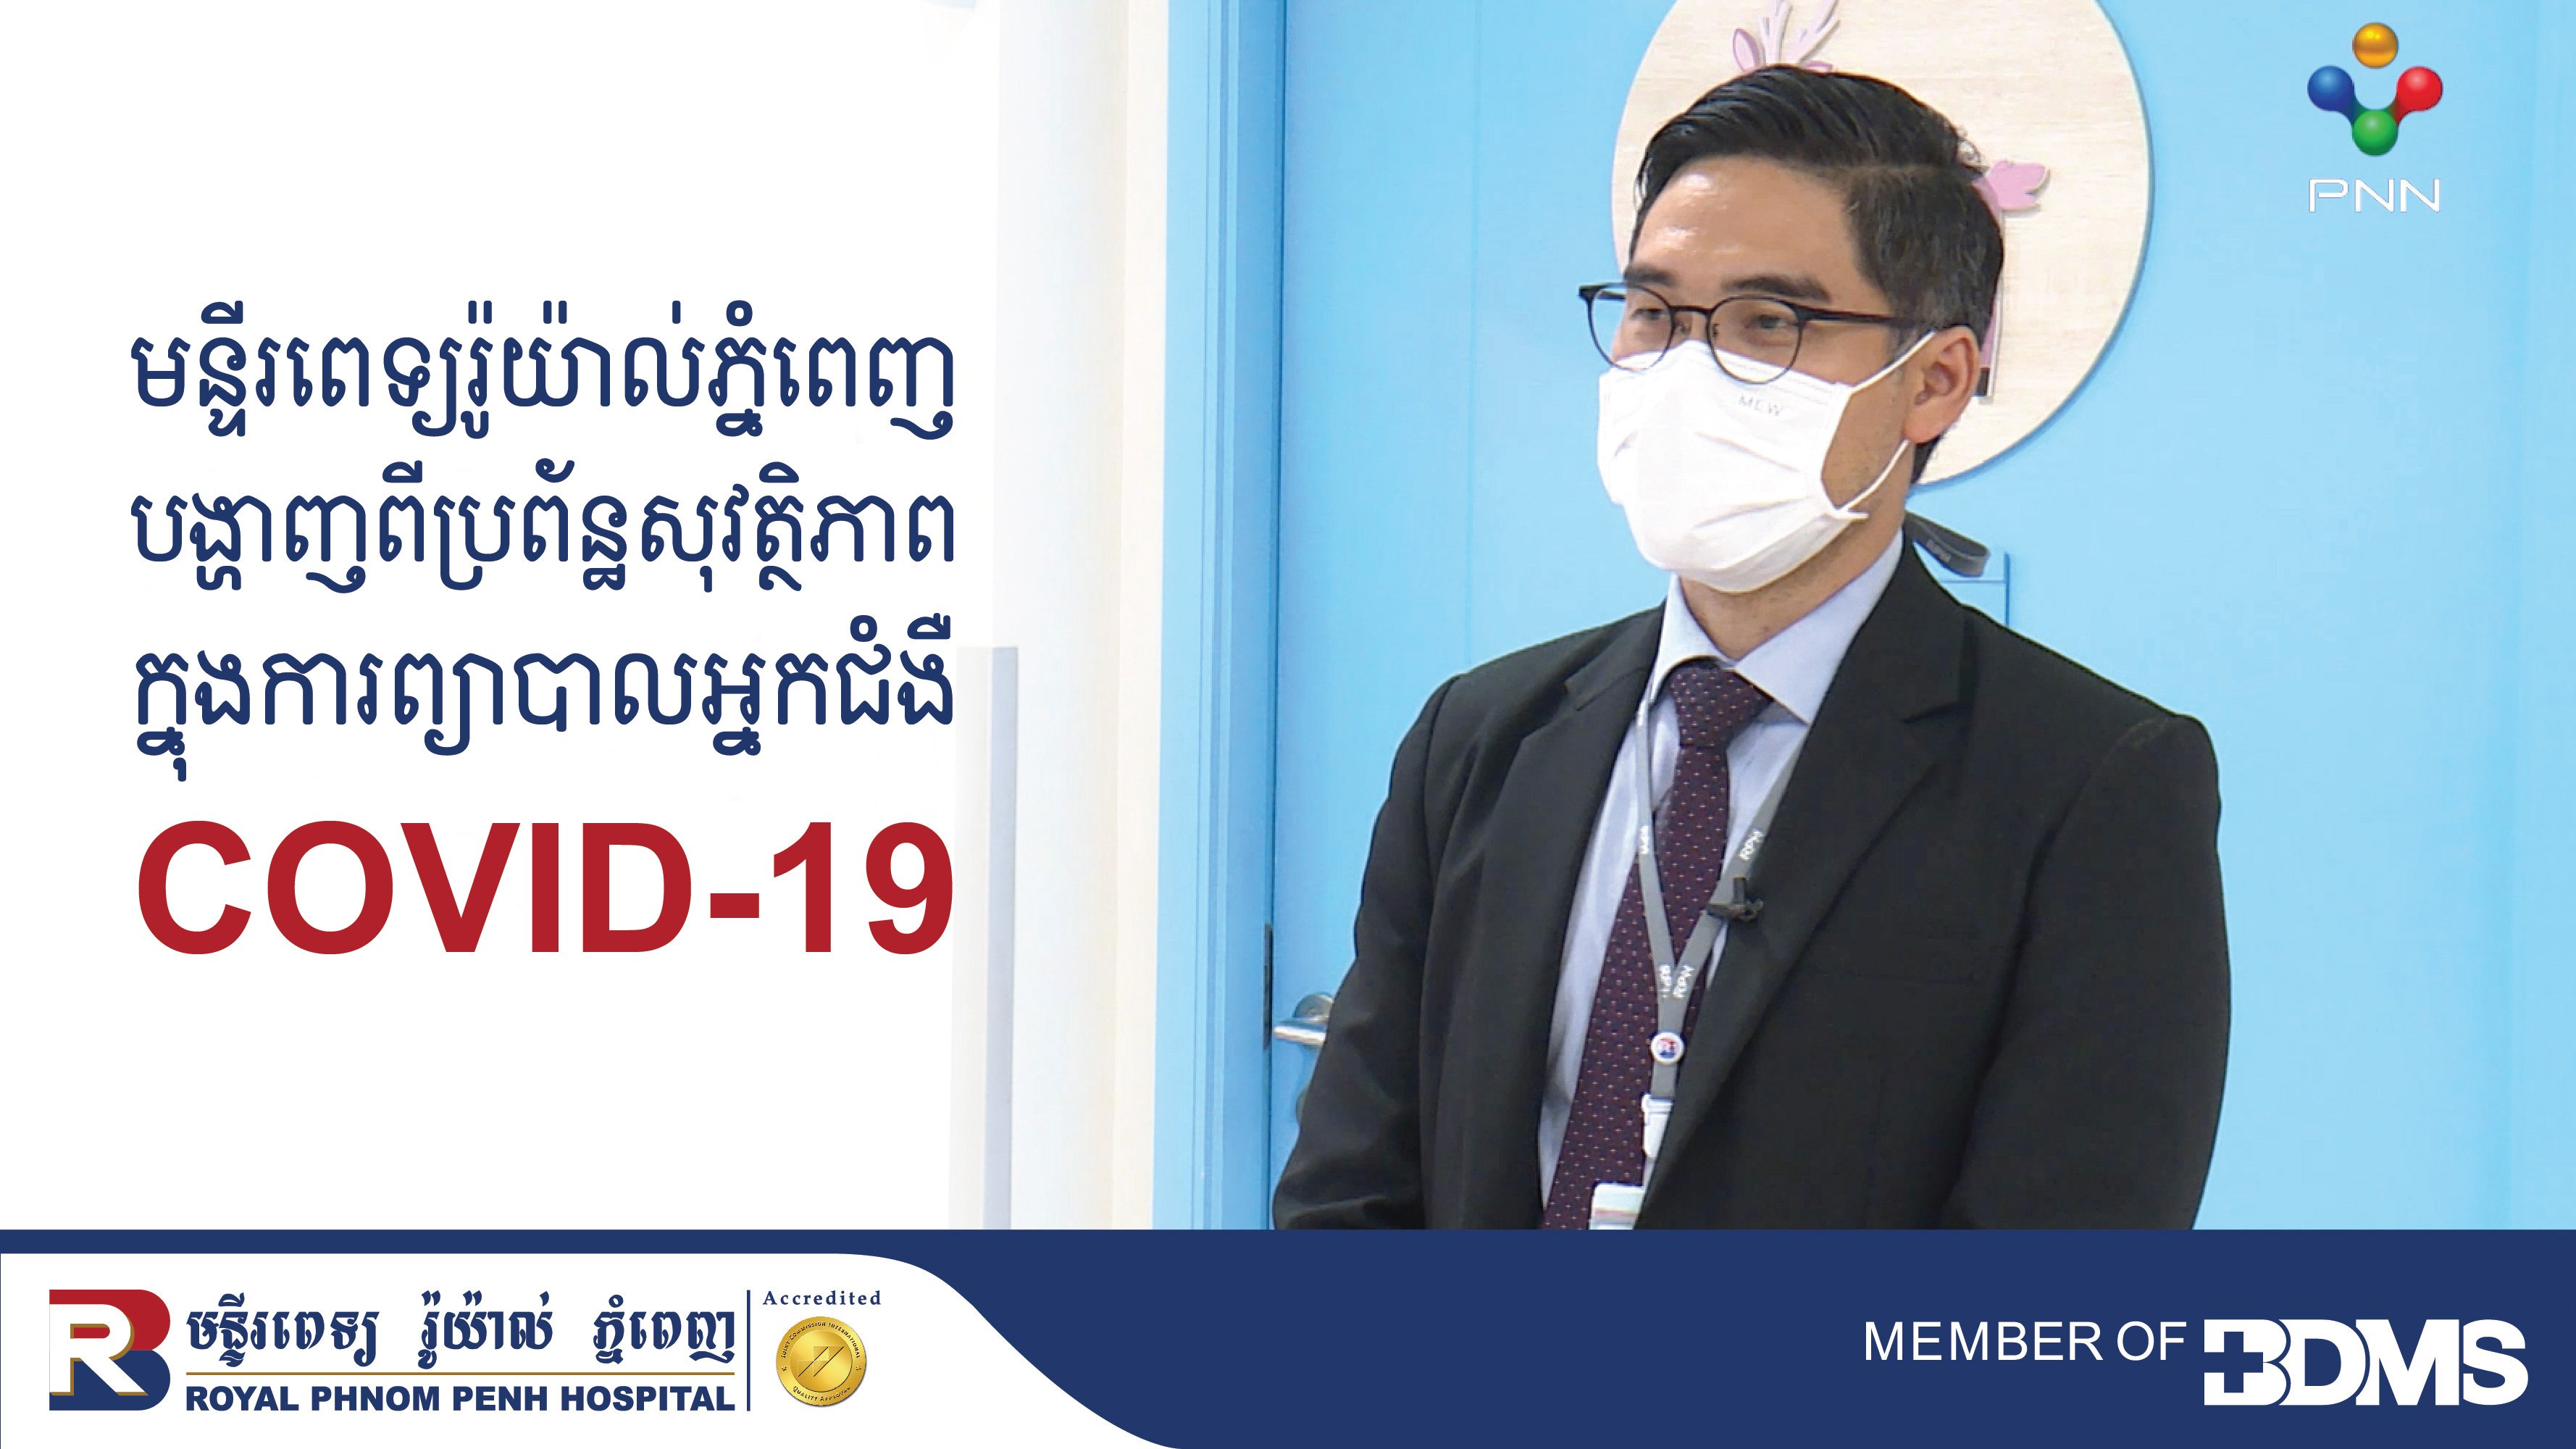 Safety systems in Royal Phnom Penh Hospital by PNN TV